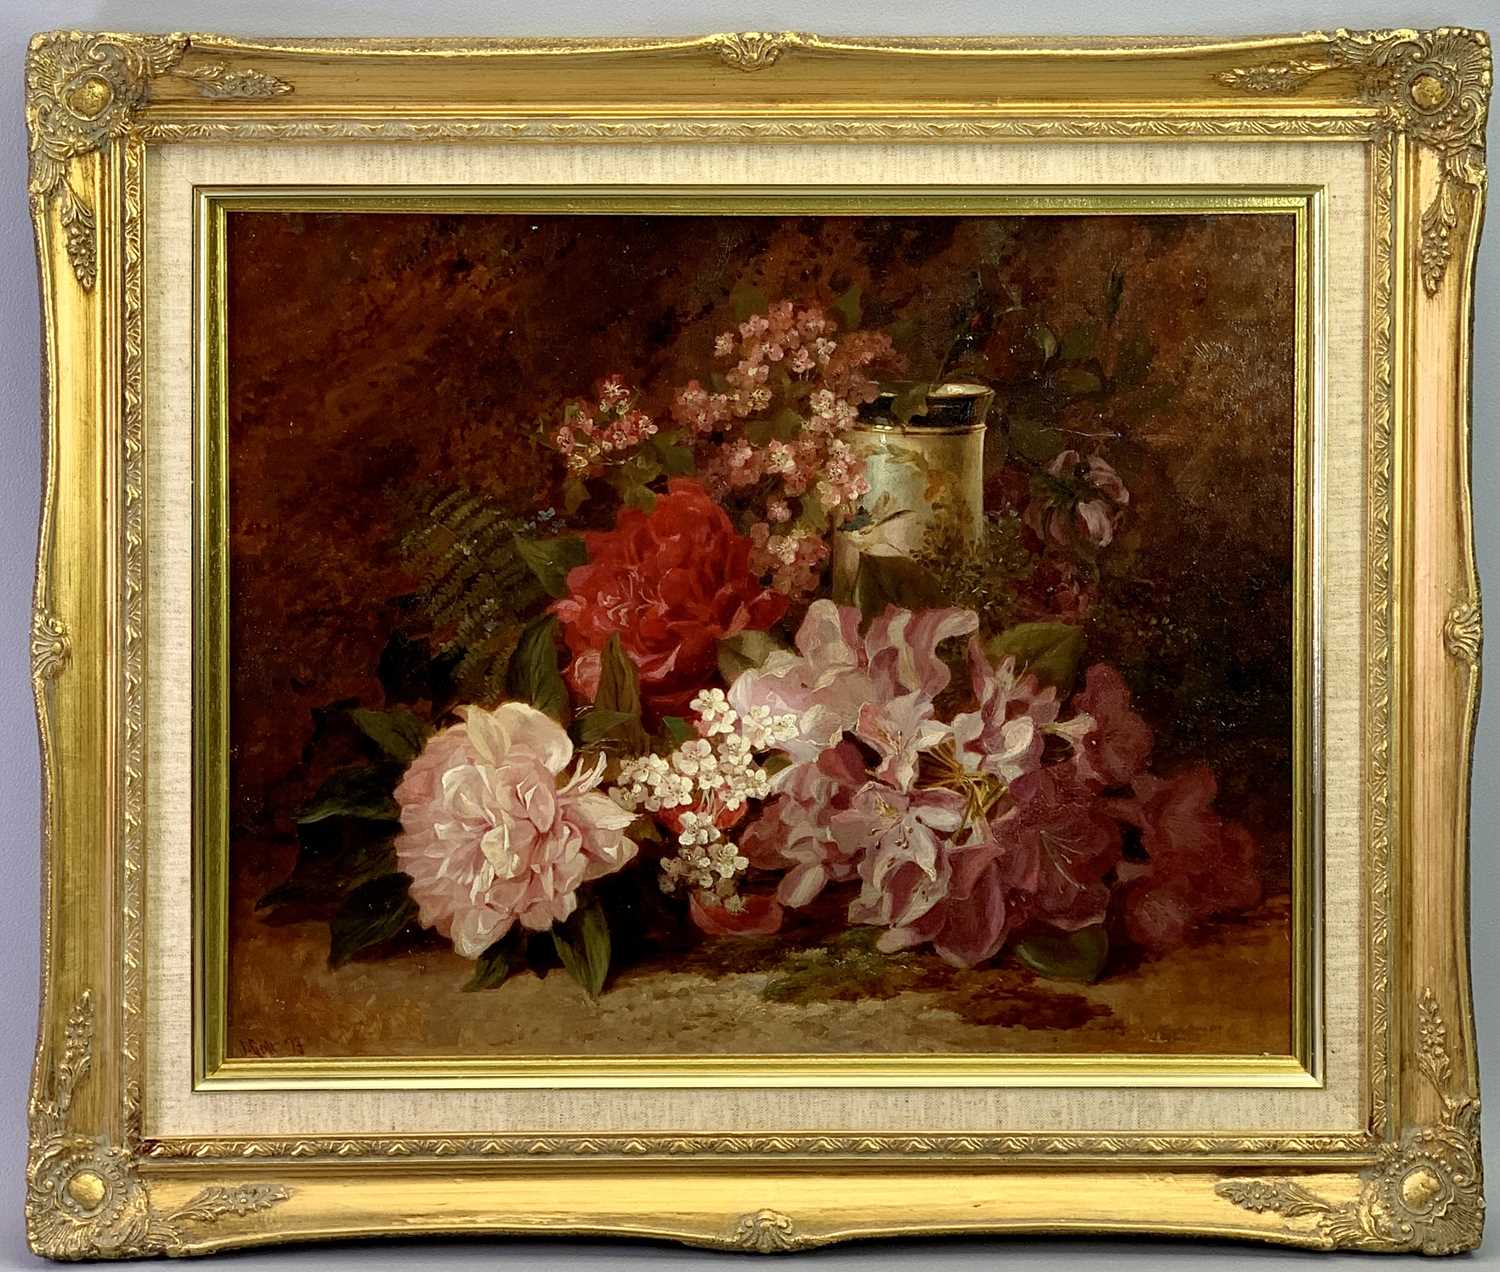 J GALT oil on board - Still life of flowers and vase, signed and dated lower left, 38 x 48cms - Image 2 of 3